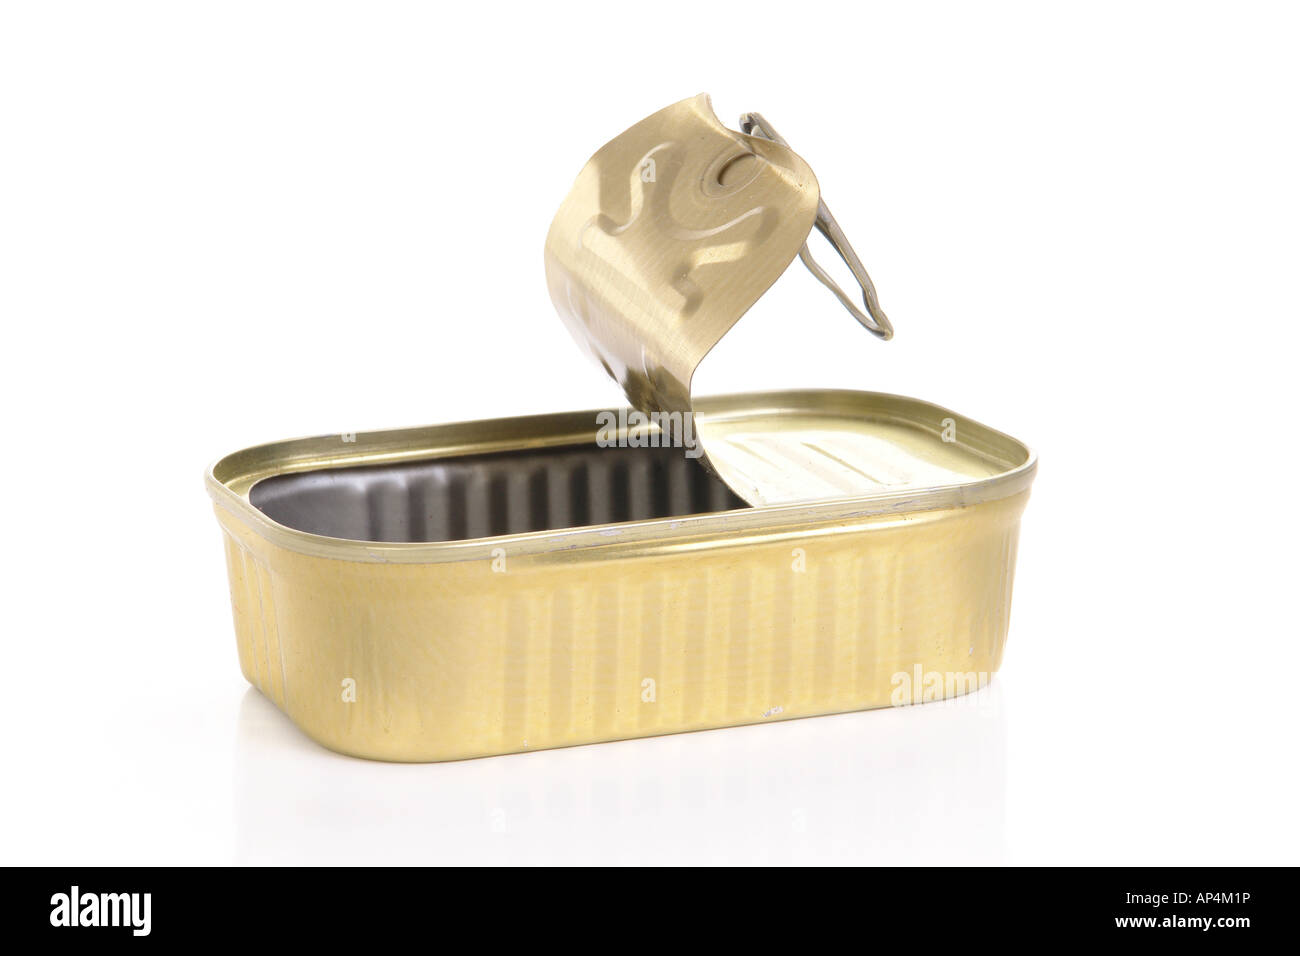 Empty canned fish tin over white background Stock Photo